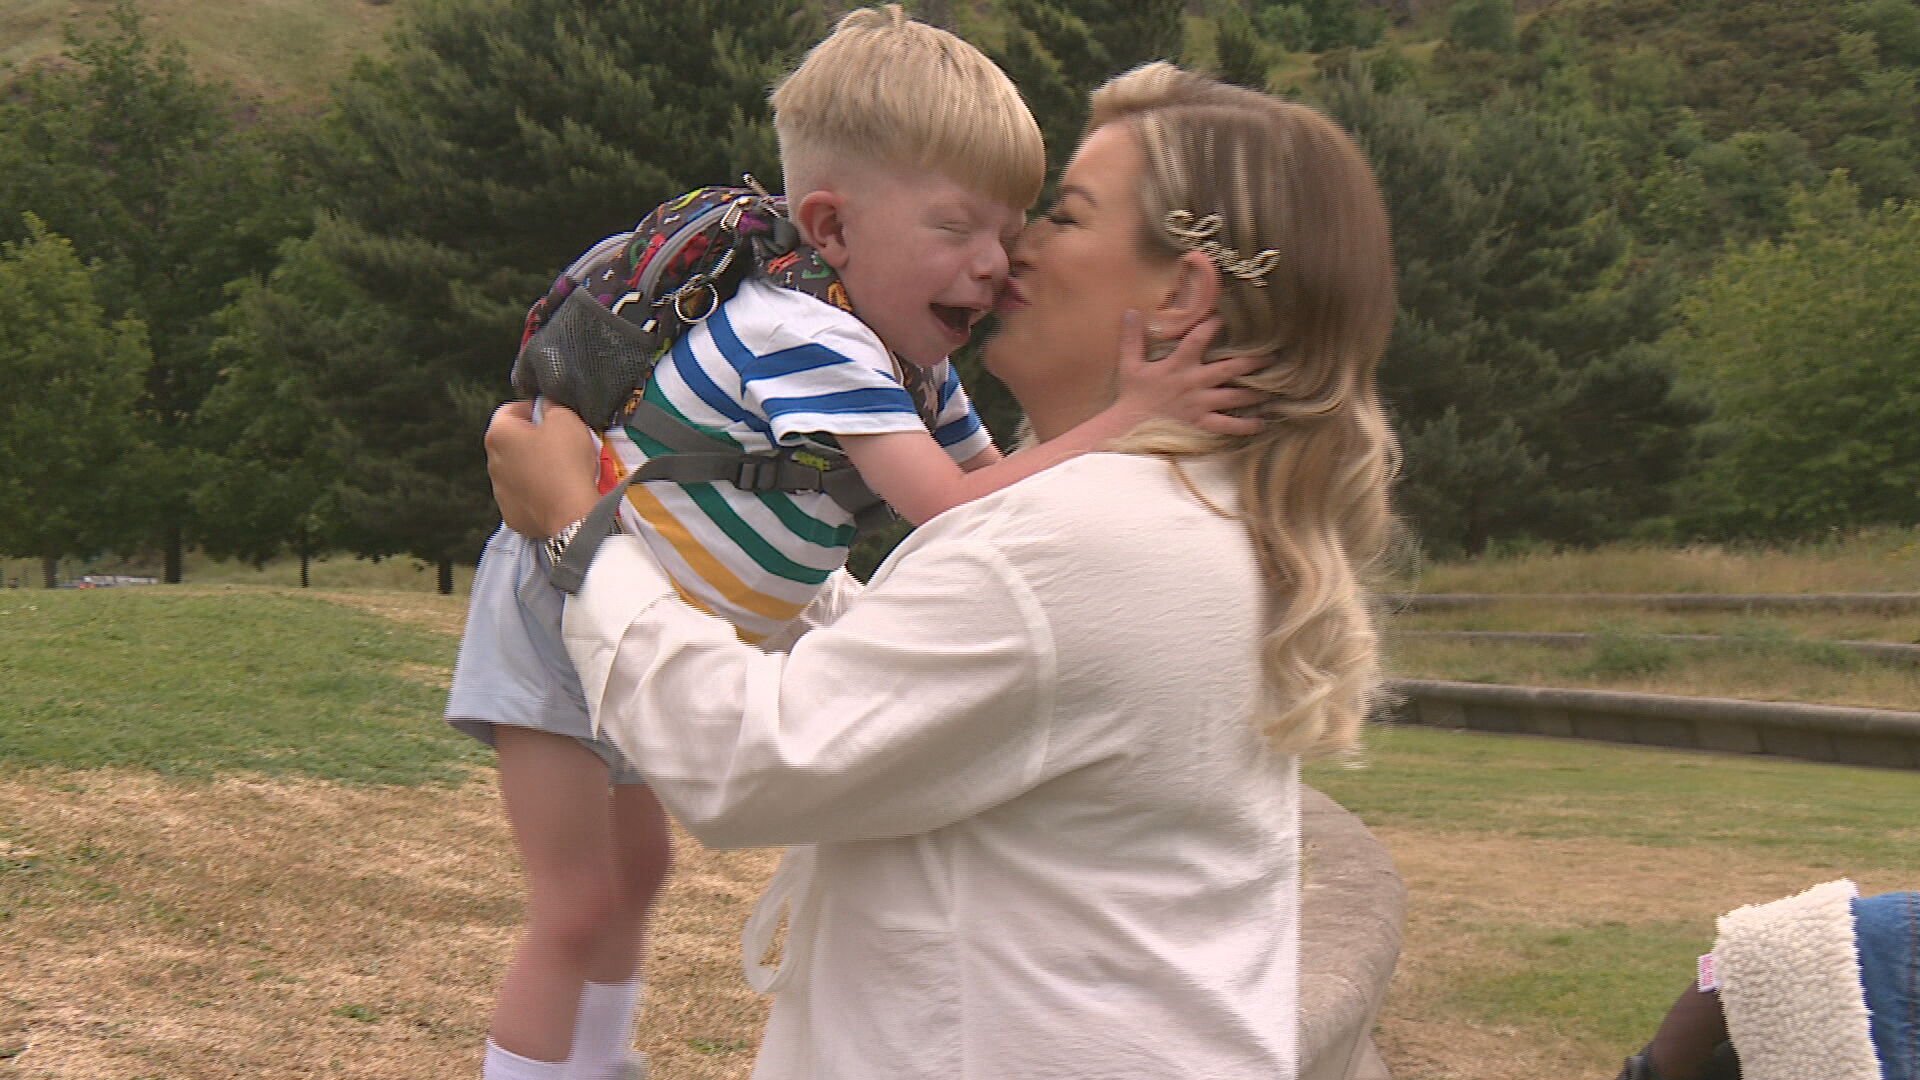 Mum Ashley says finding a lung donor for her son would be 'better than winning the lottery'. 